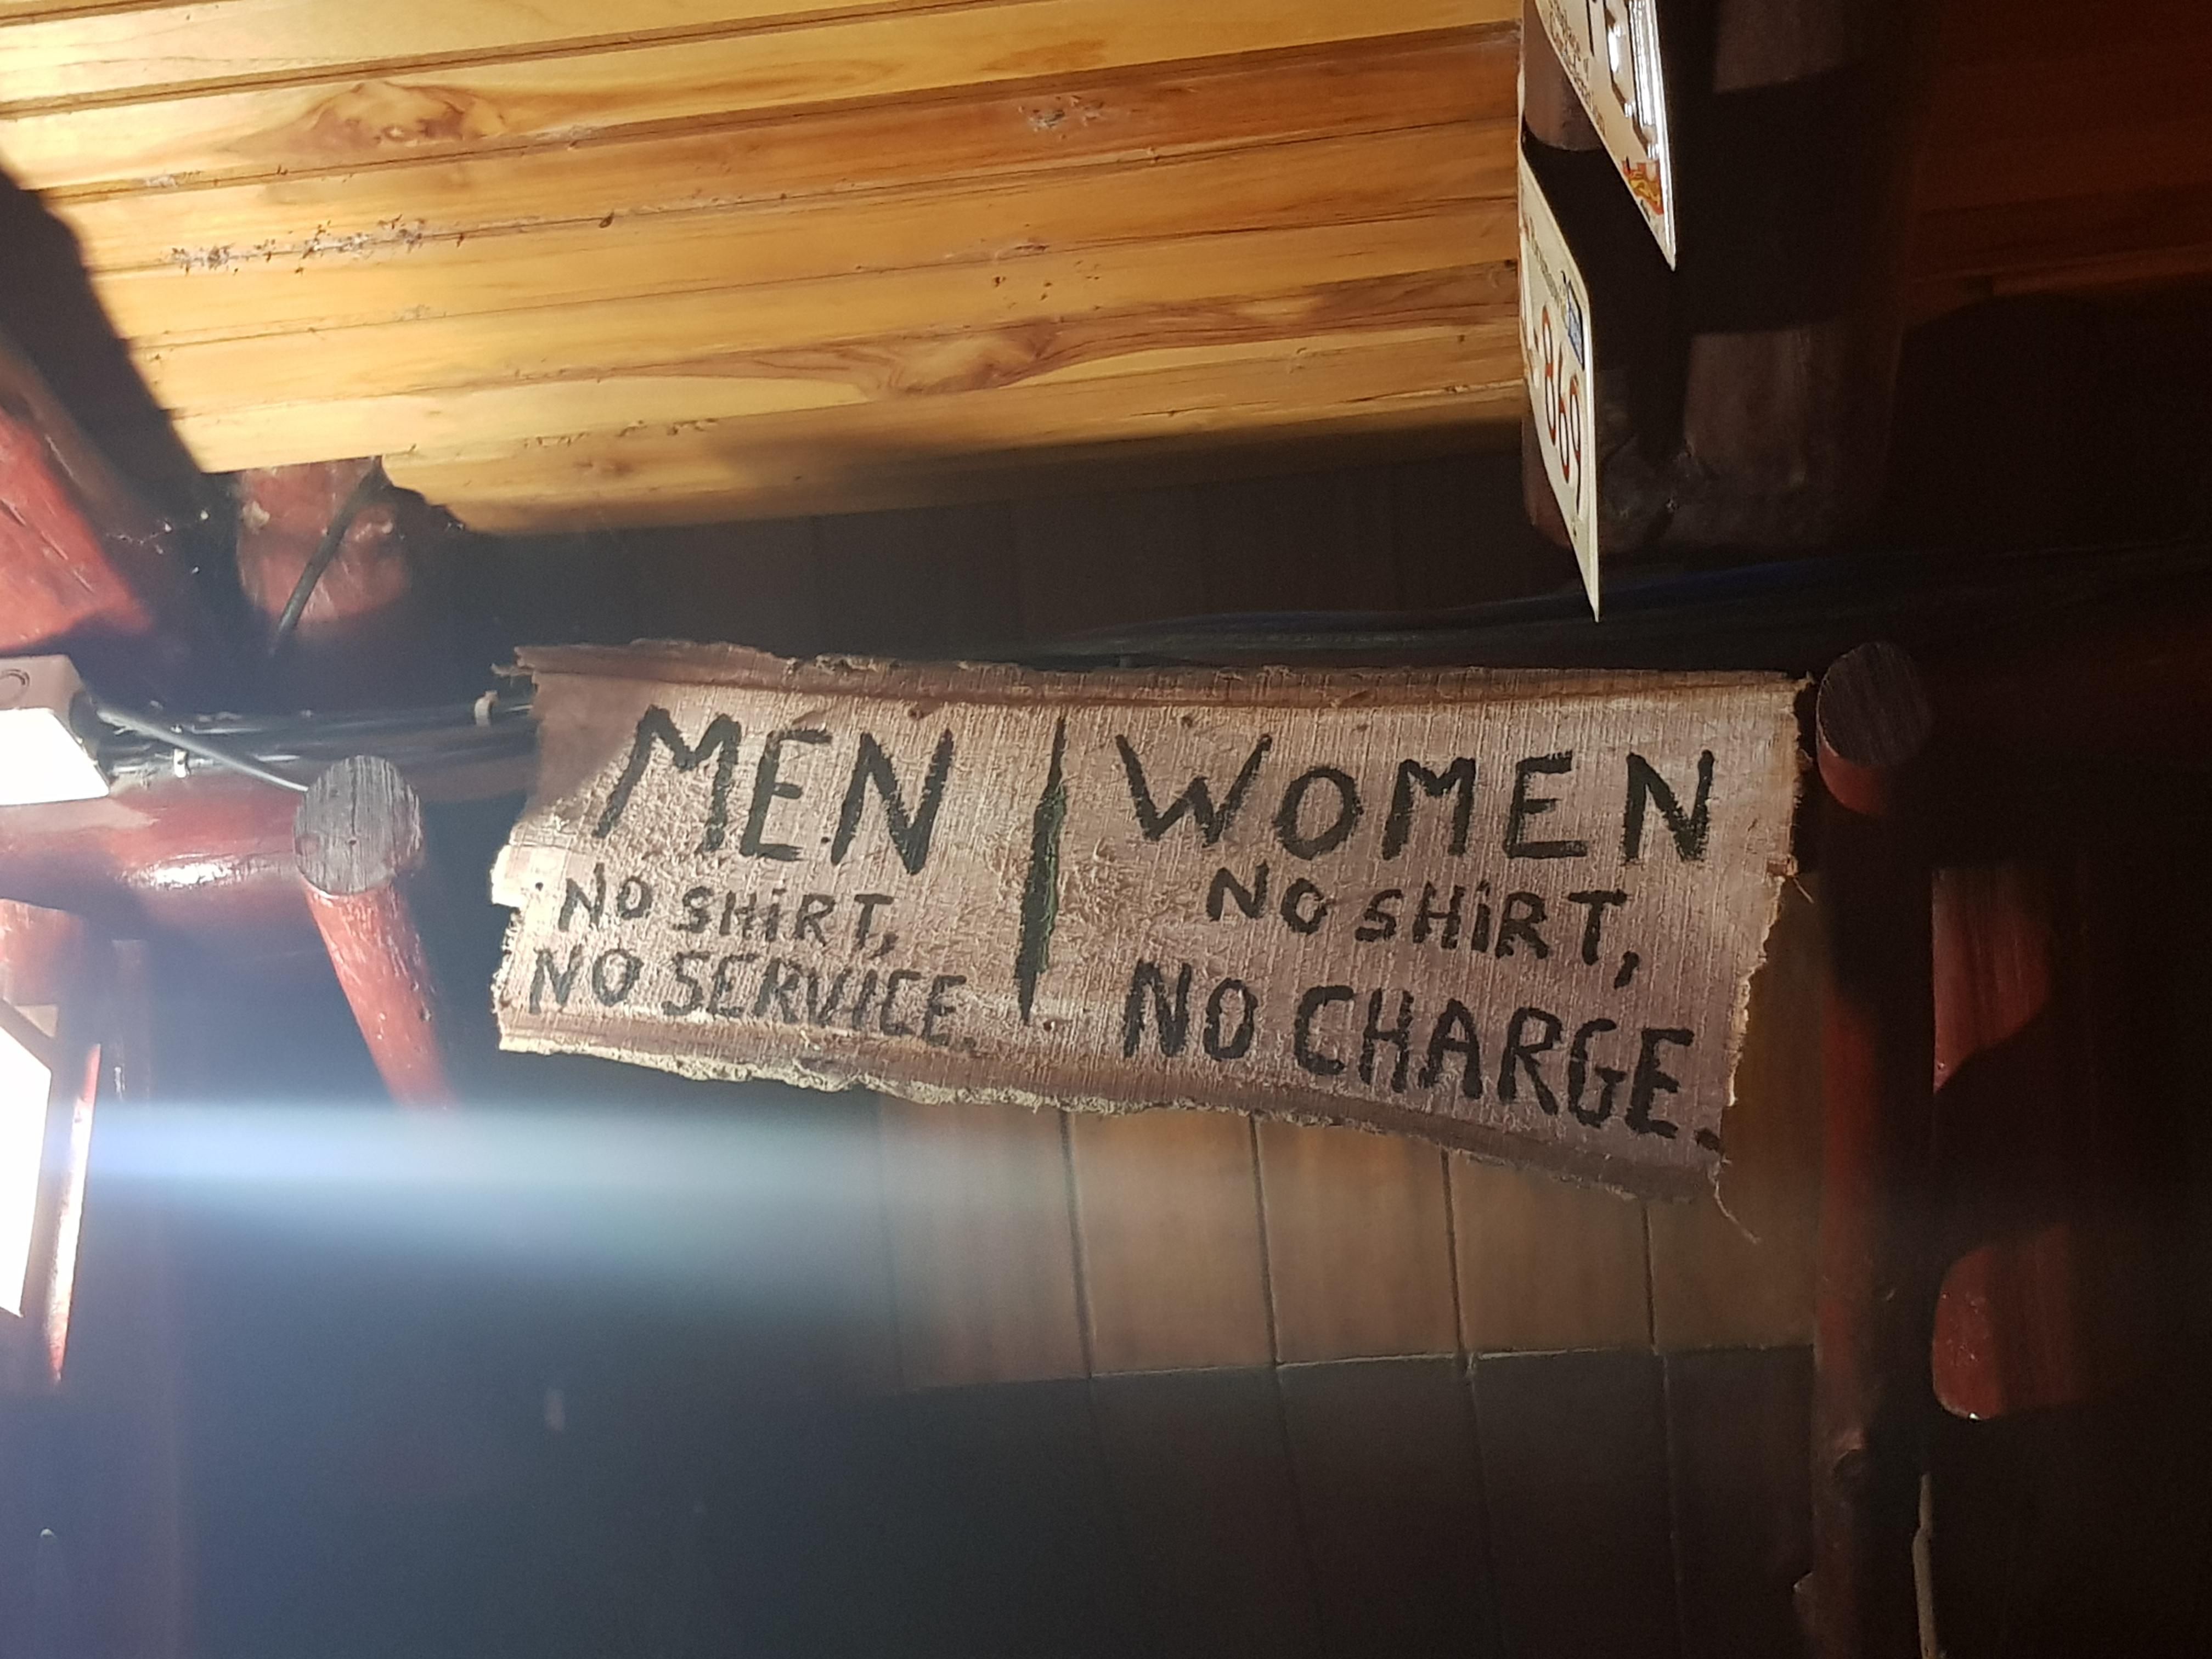 This sign in a bar in Costa Rica